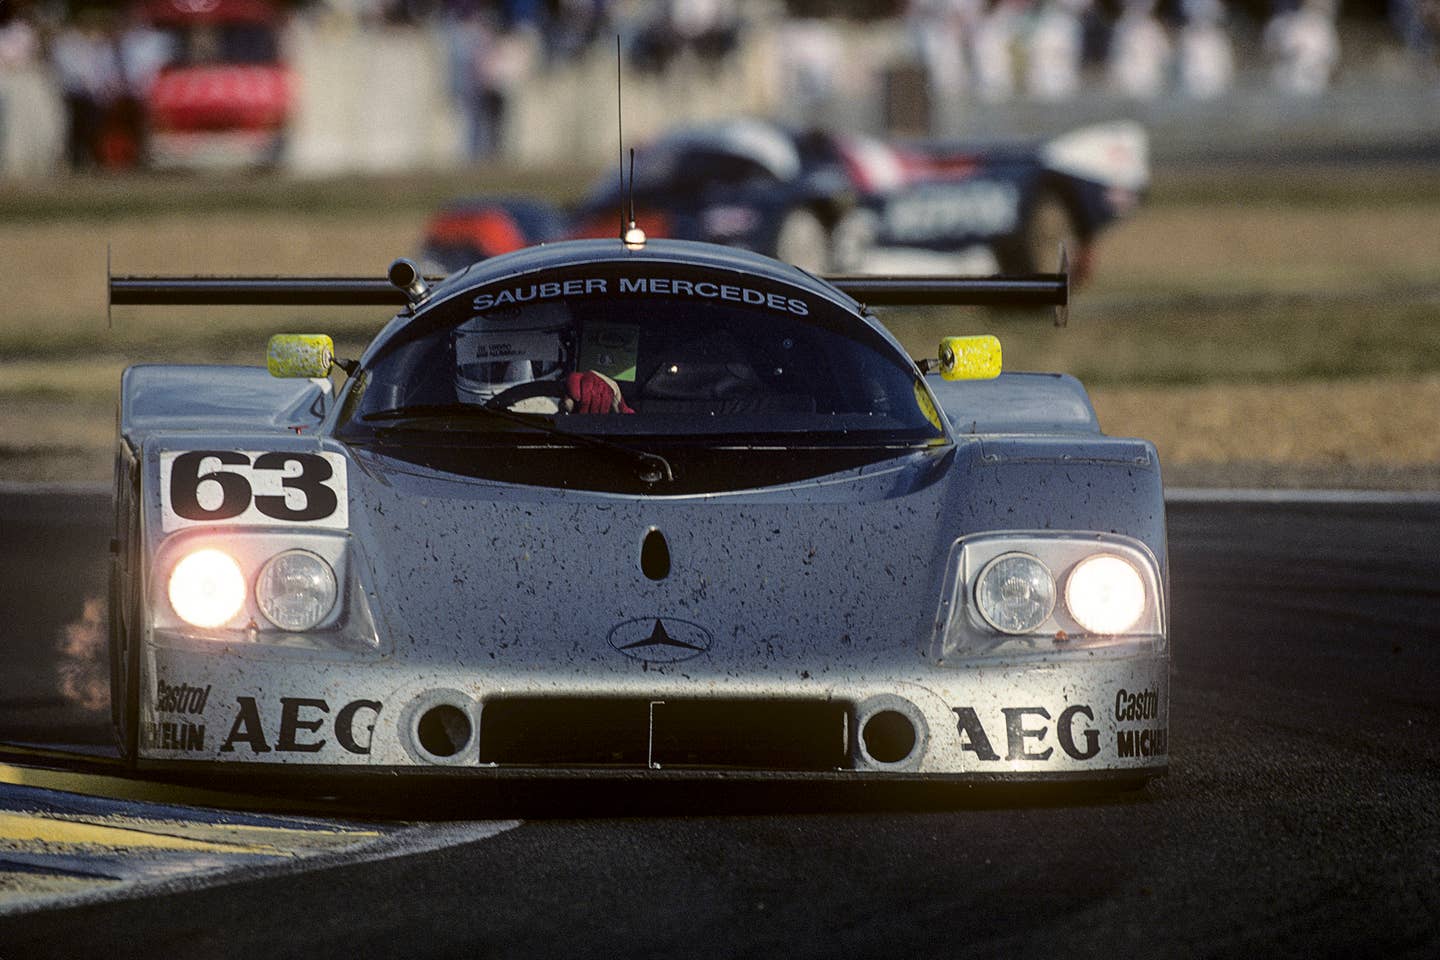 The No. 63 Sauber-Mercedes C9 that won the 1989 24 Hours of Le Mans, driven by Jochen Mass, Manuel Reuter, and Stanley Dickens.